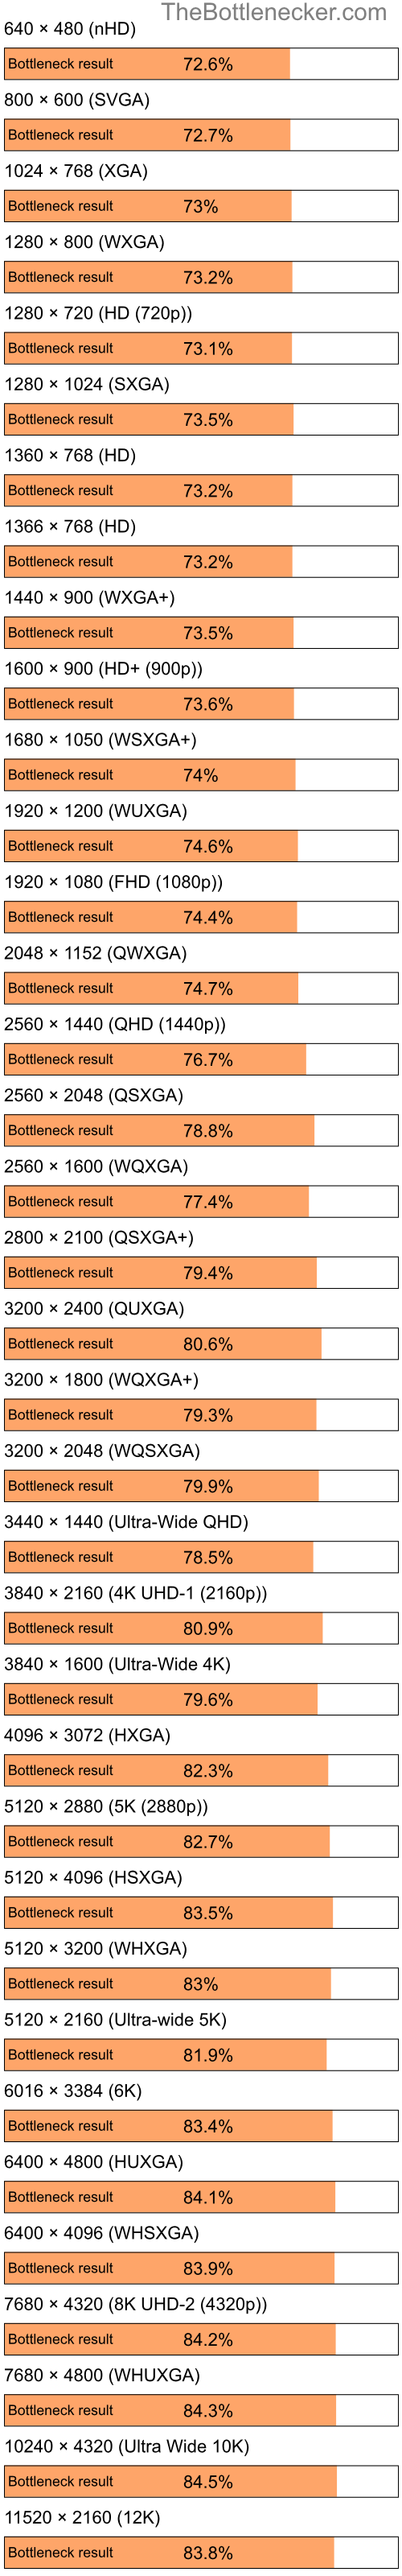 Bottleneck results by resolution for Intel Atom Z520 and NVIDIA GeForce 8100 in Graphic Card Intense Tasks